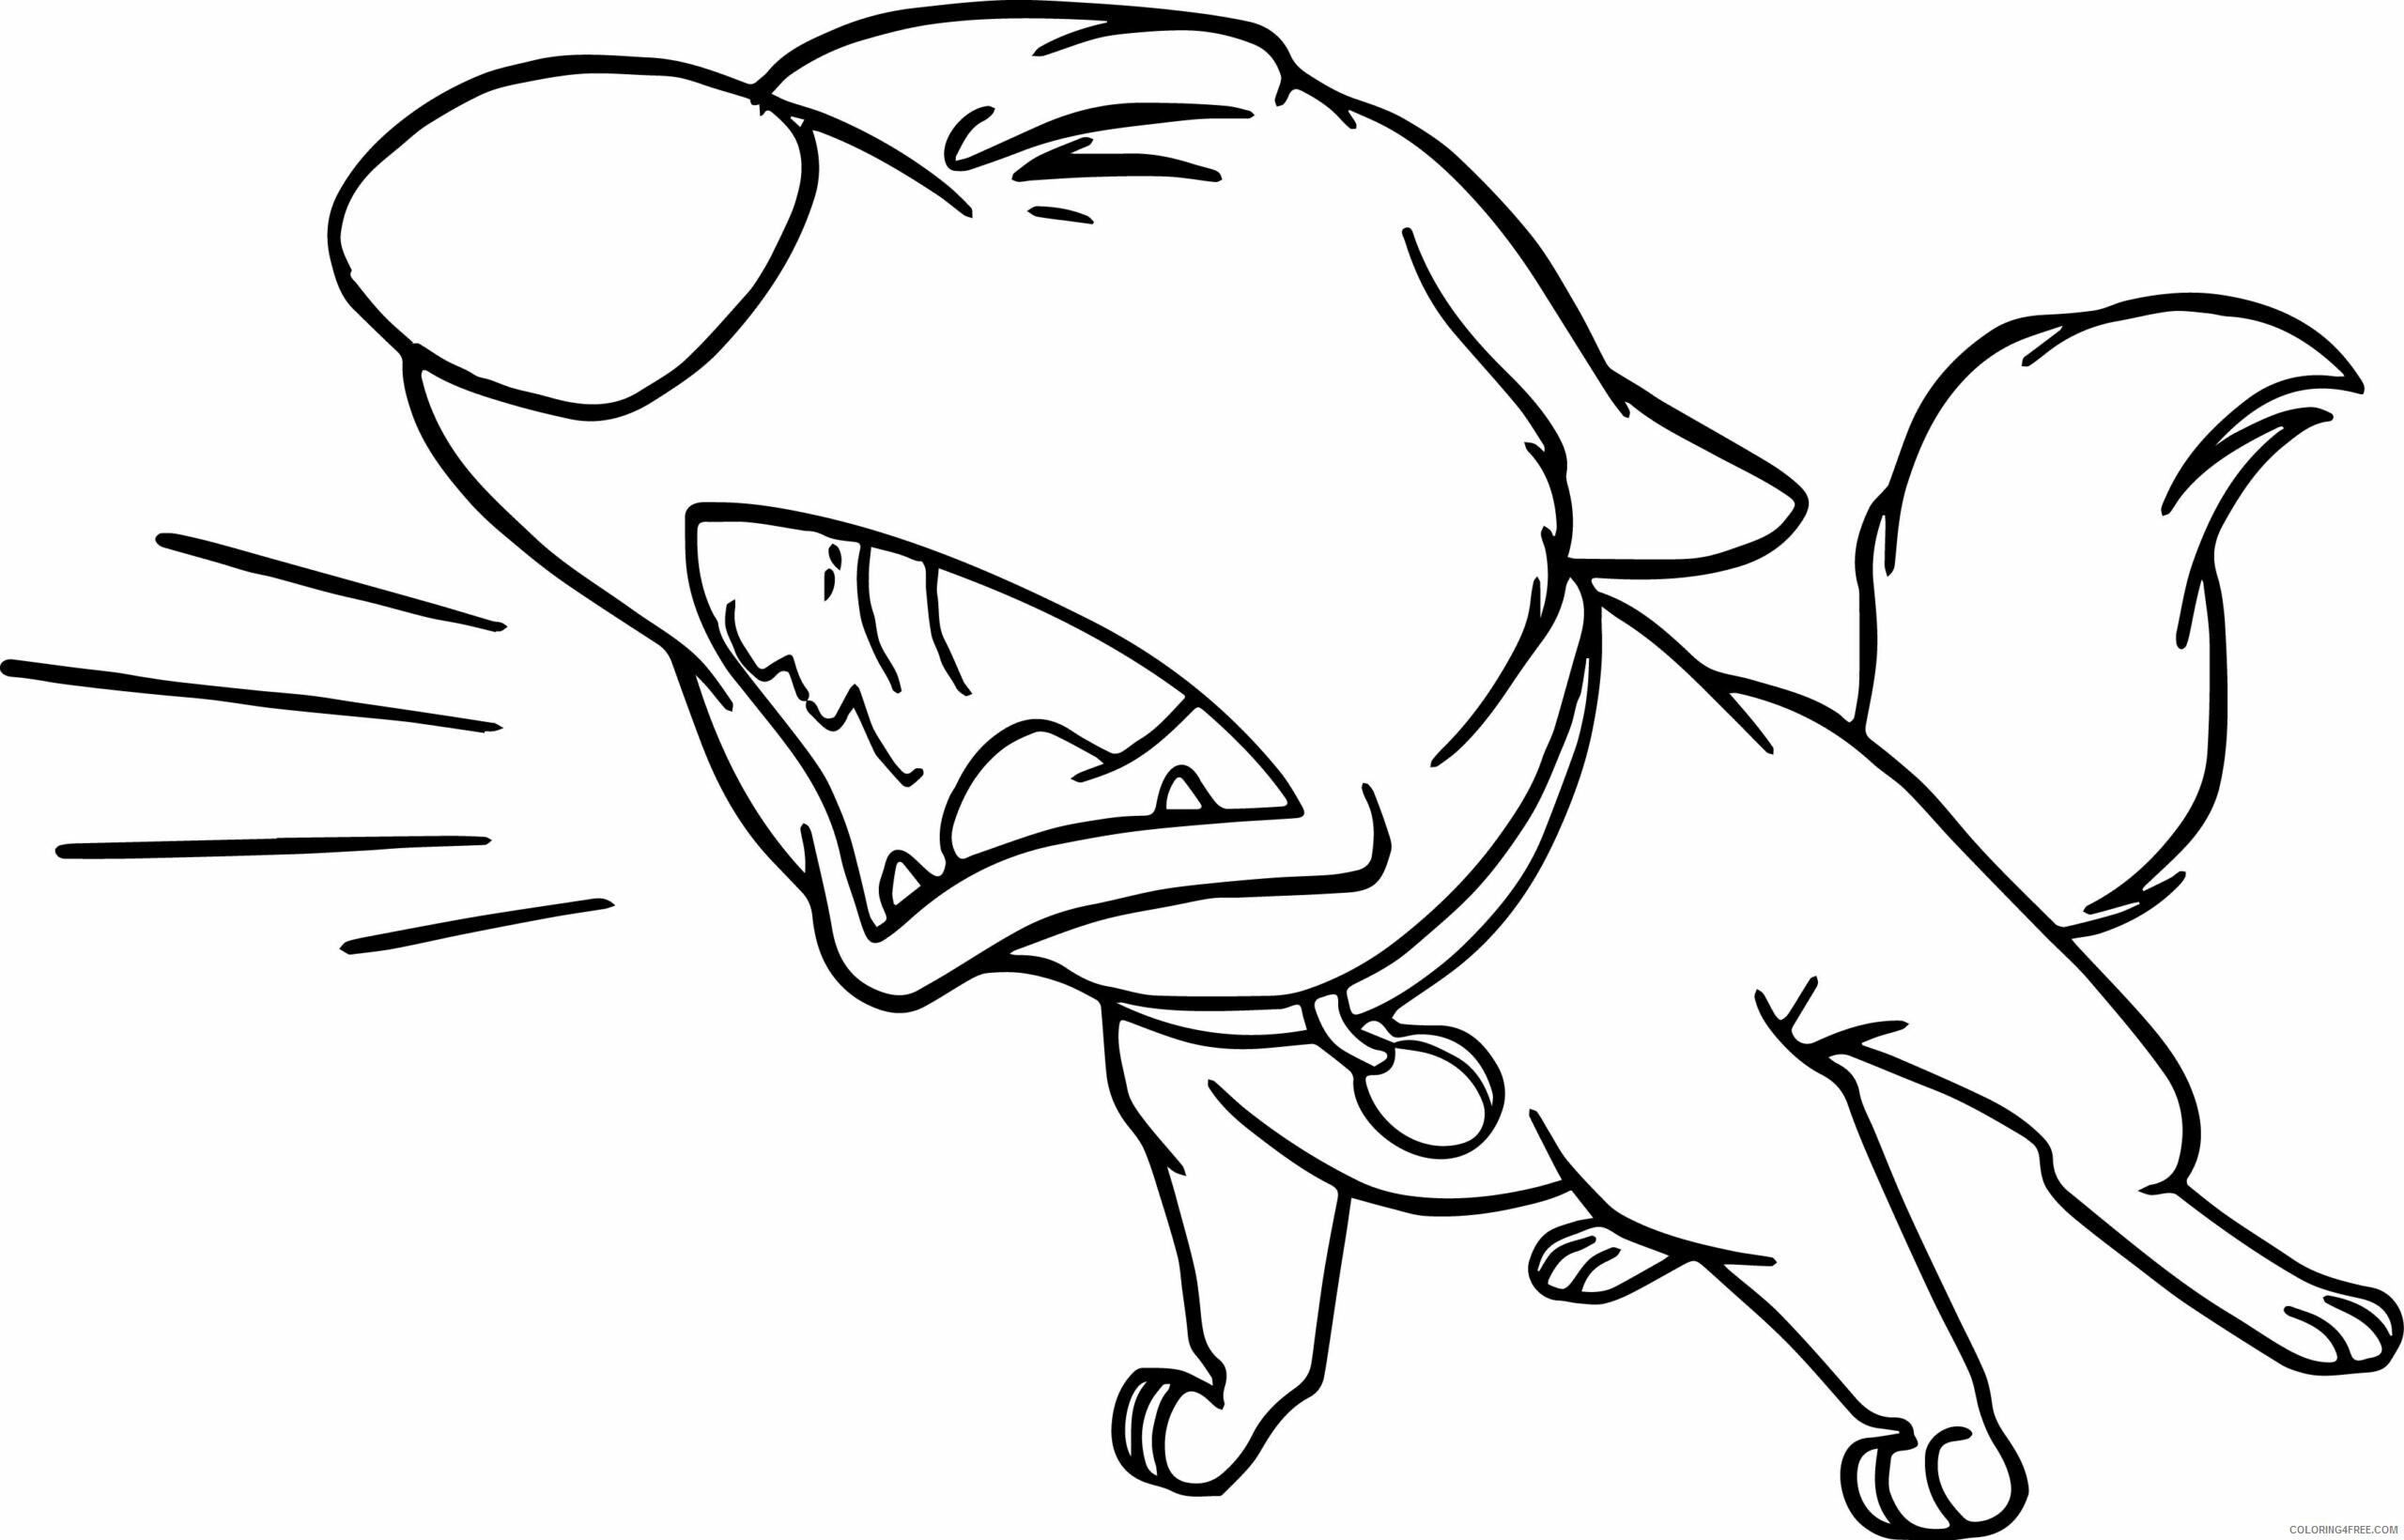 Bolt Coloring Pages TV Film Bolt Barking Printable 2020 01212 Coloring4free